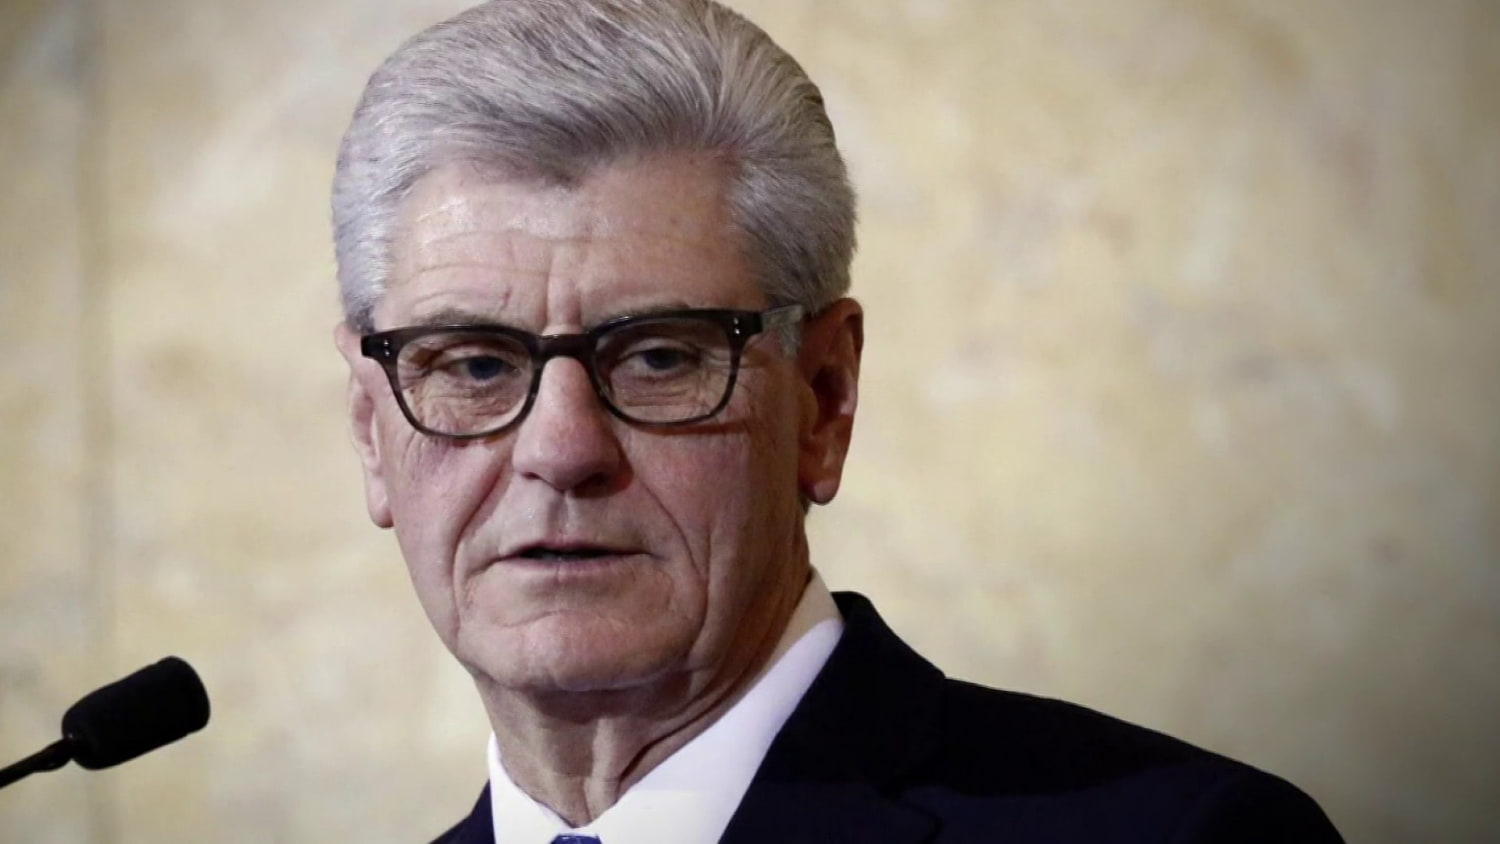 Former Mississippi governor demands sources, sues reporters and editors for defamation